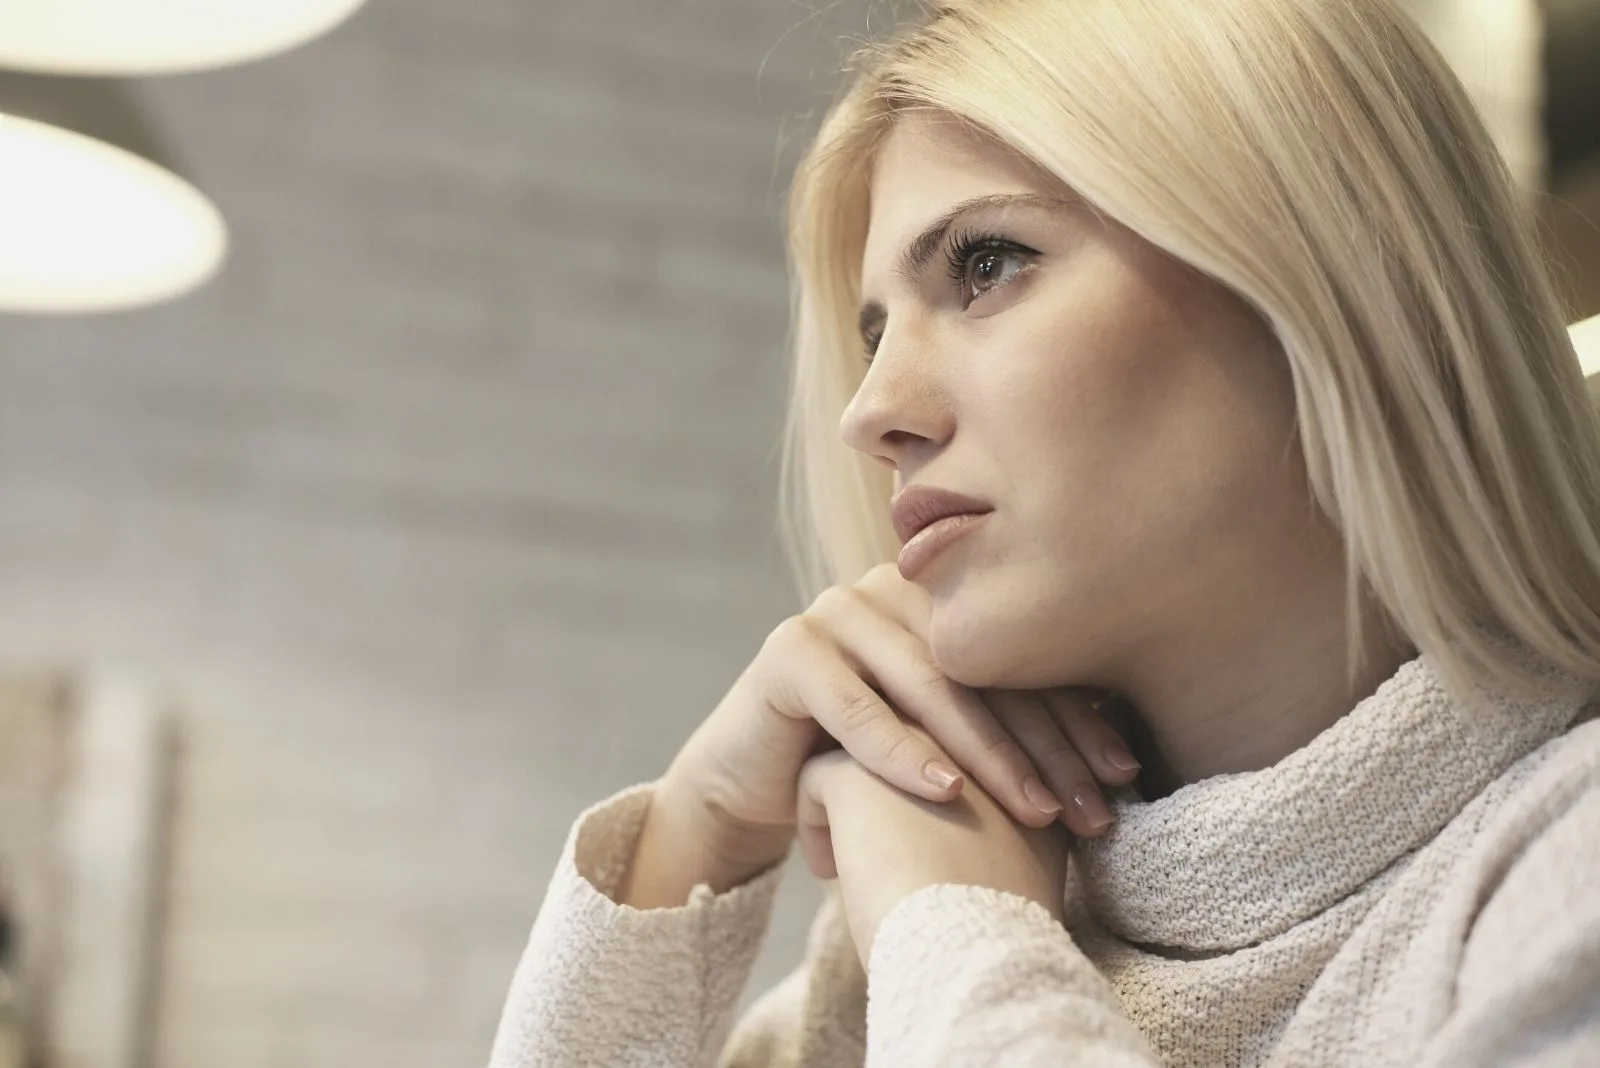 pensive and young lady sitting with blonde straight hair and head leaning on both hands in low angle